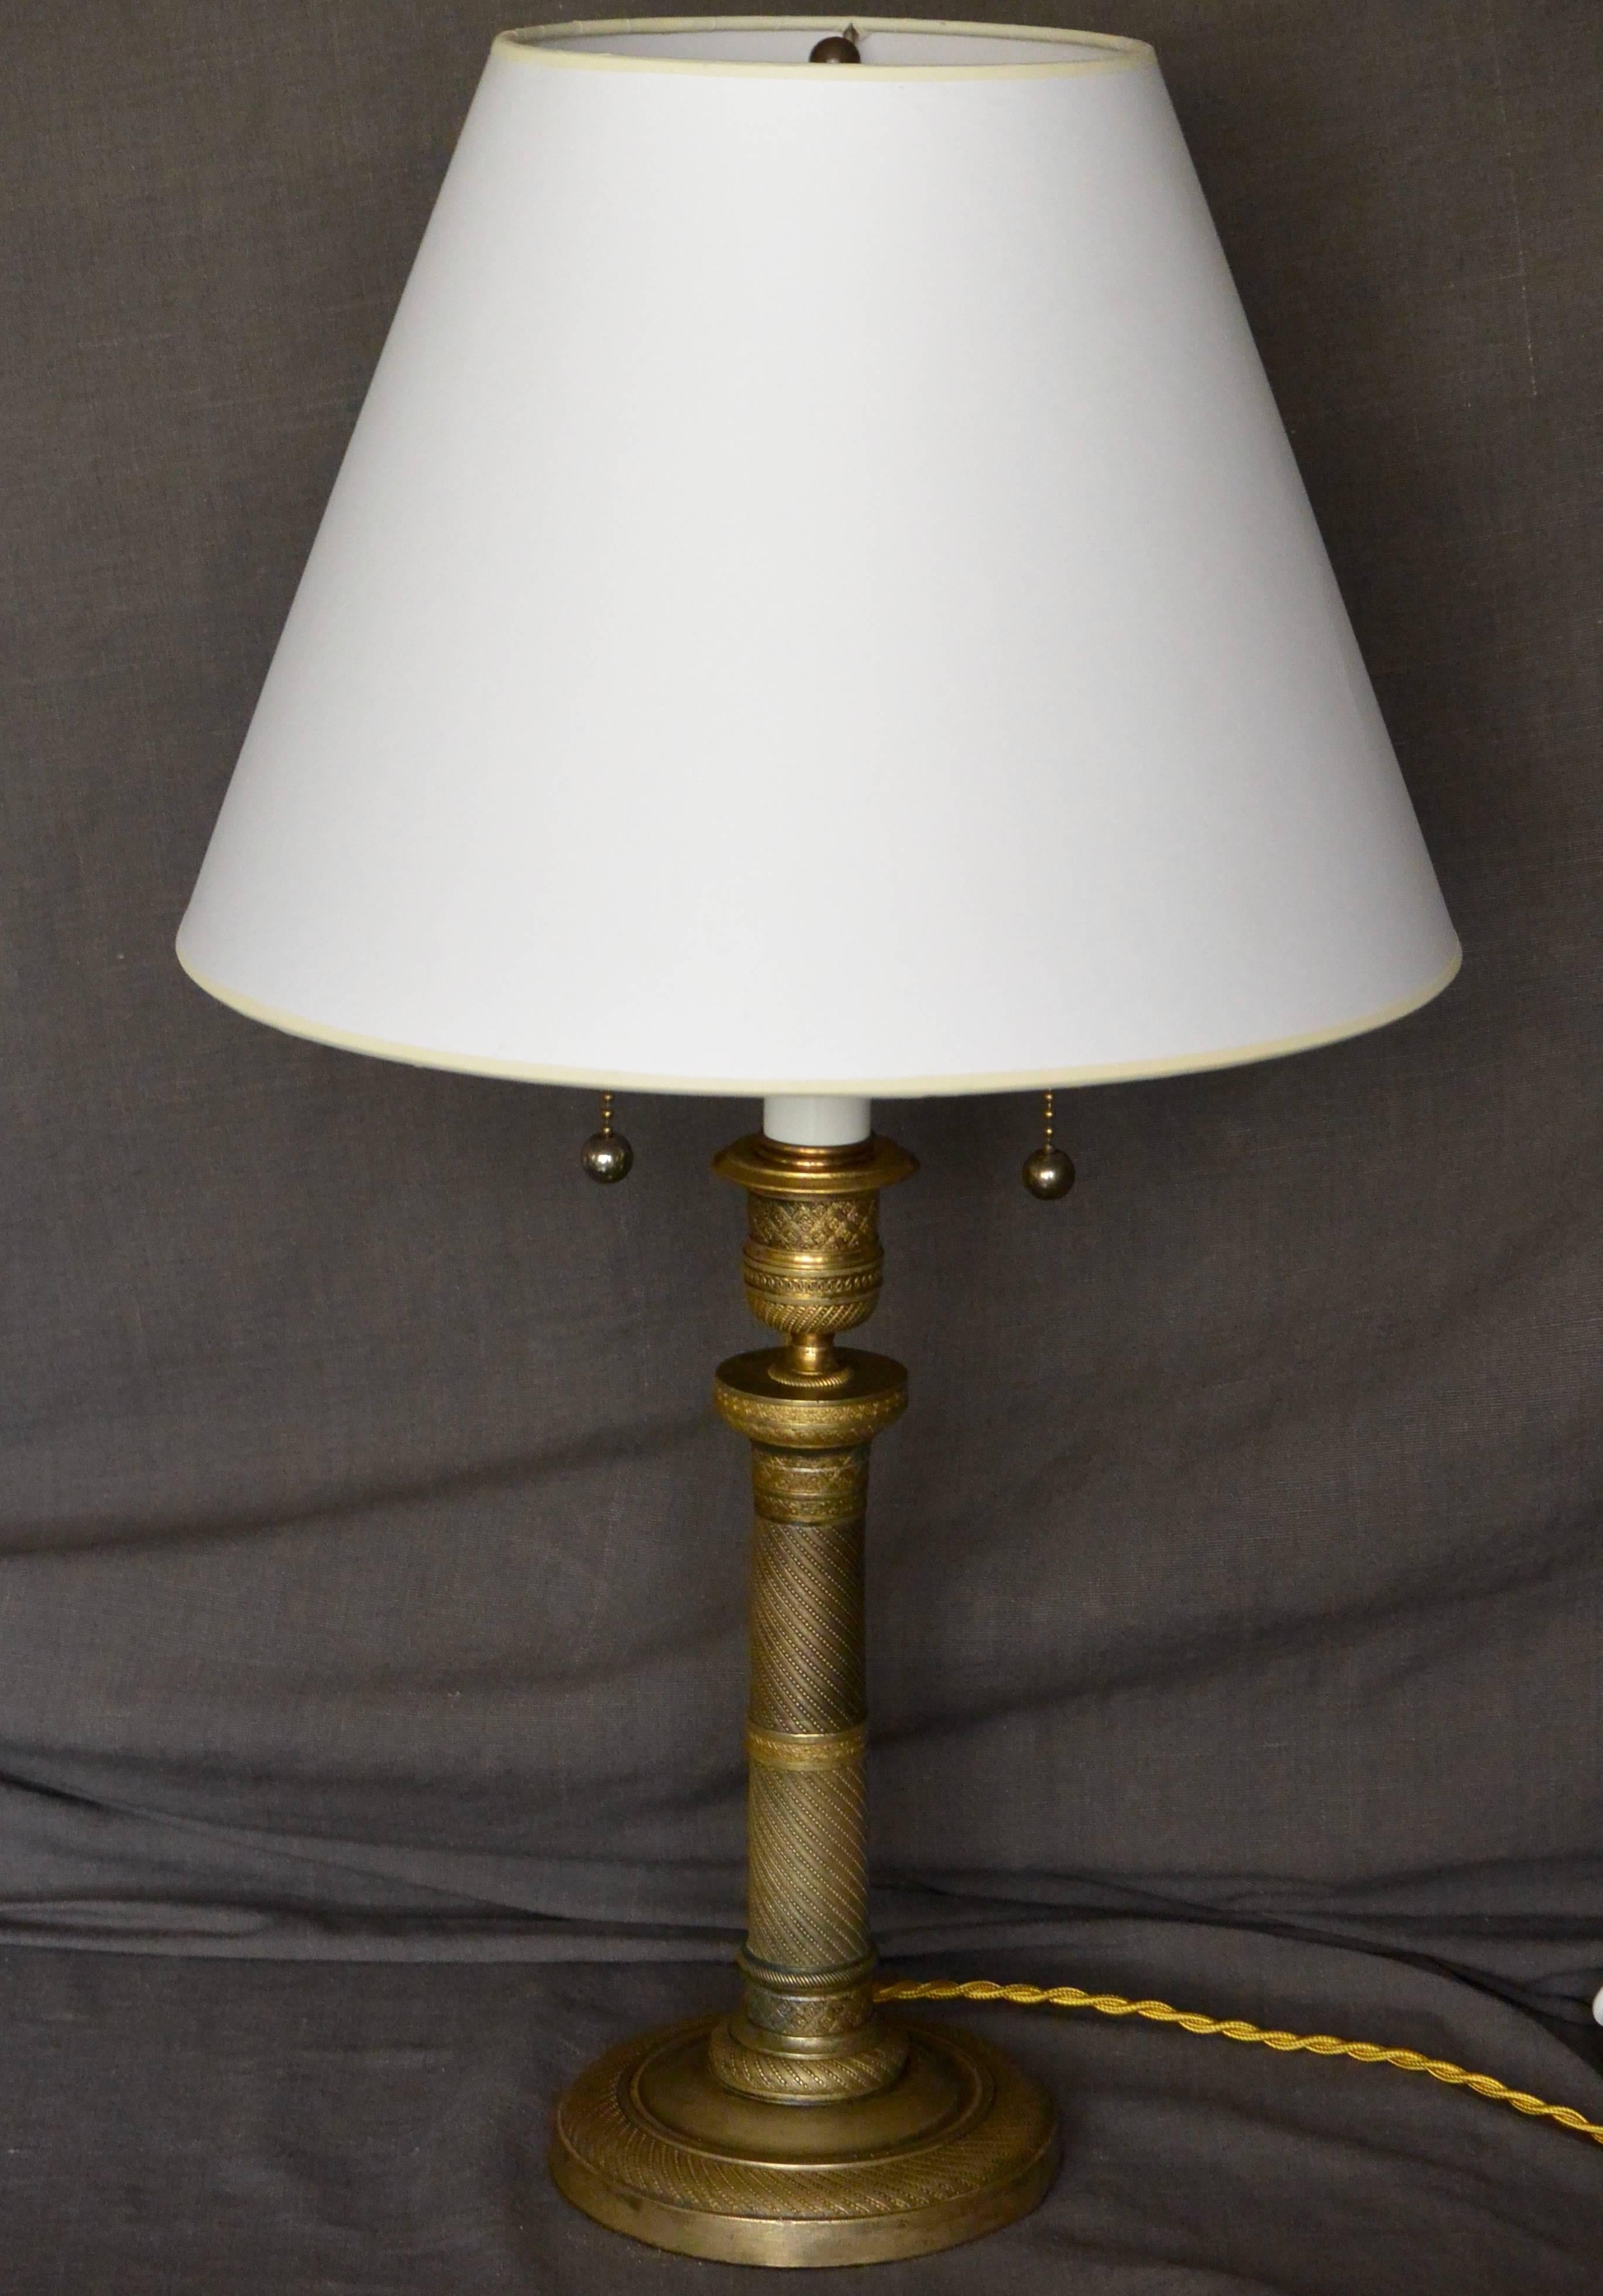 Charles X gilt metal candlestick lamp. Charles X gilt metal candlestick mounted as a lamp, newly re-electrified with two lights in gold silk cord and switch.  France, circa 1830. 
Lampshade is optional and not included.  
Dimensions: 5